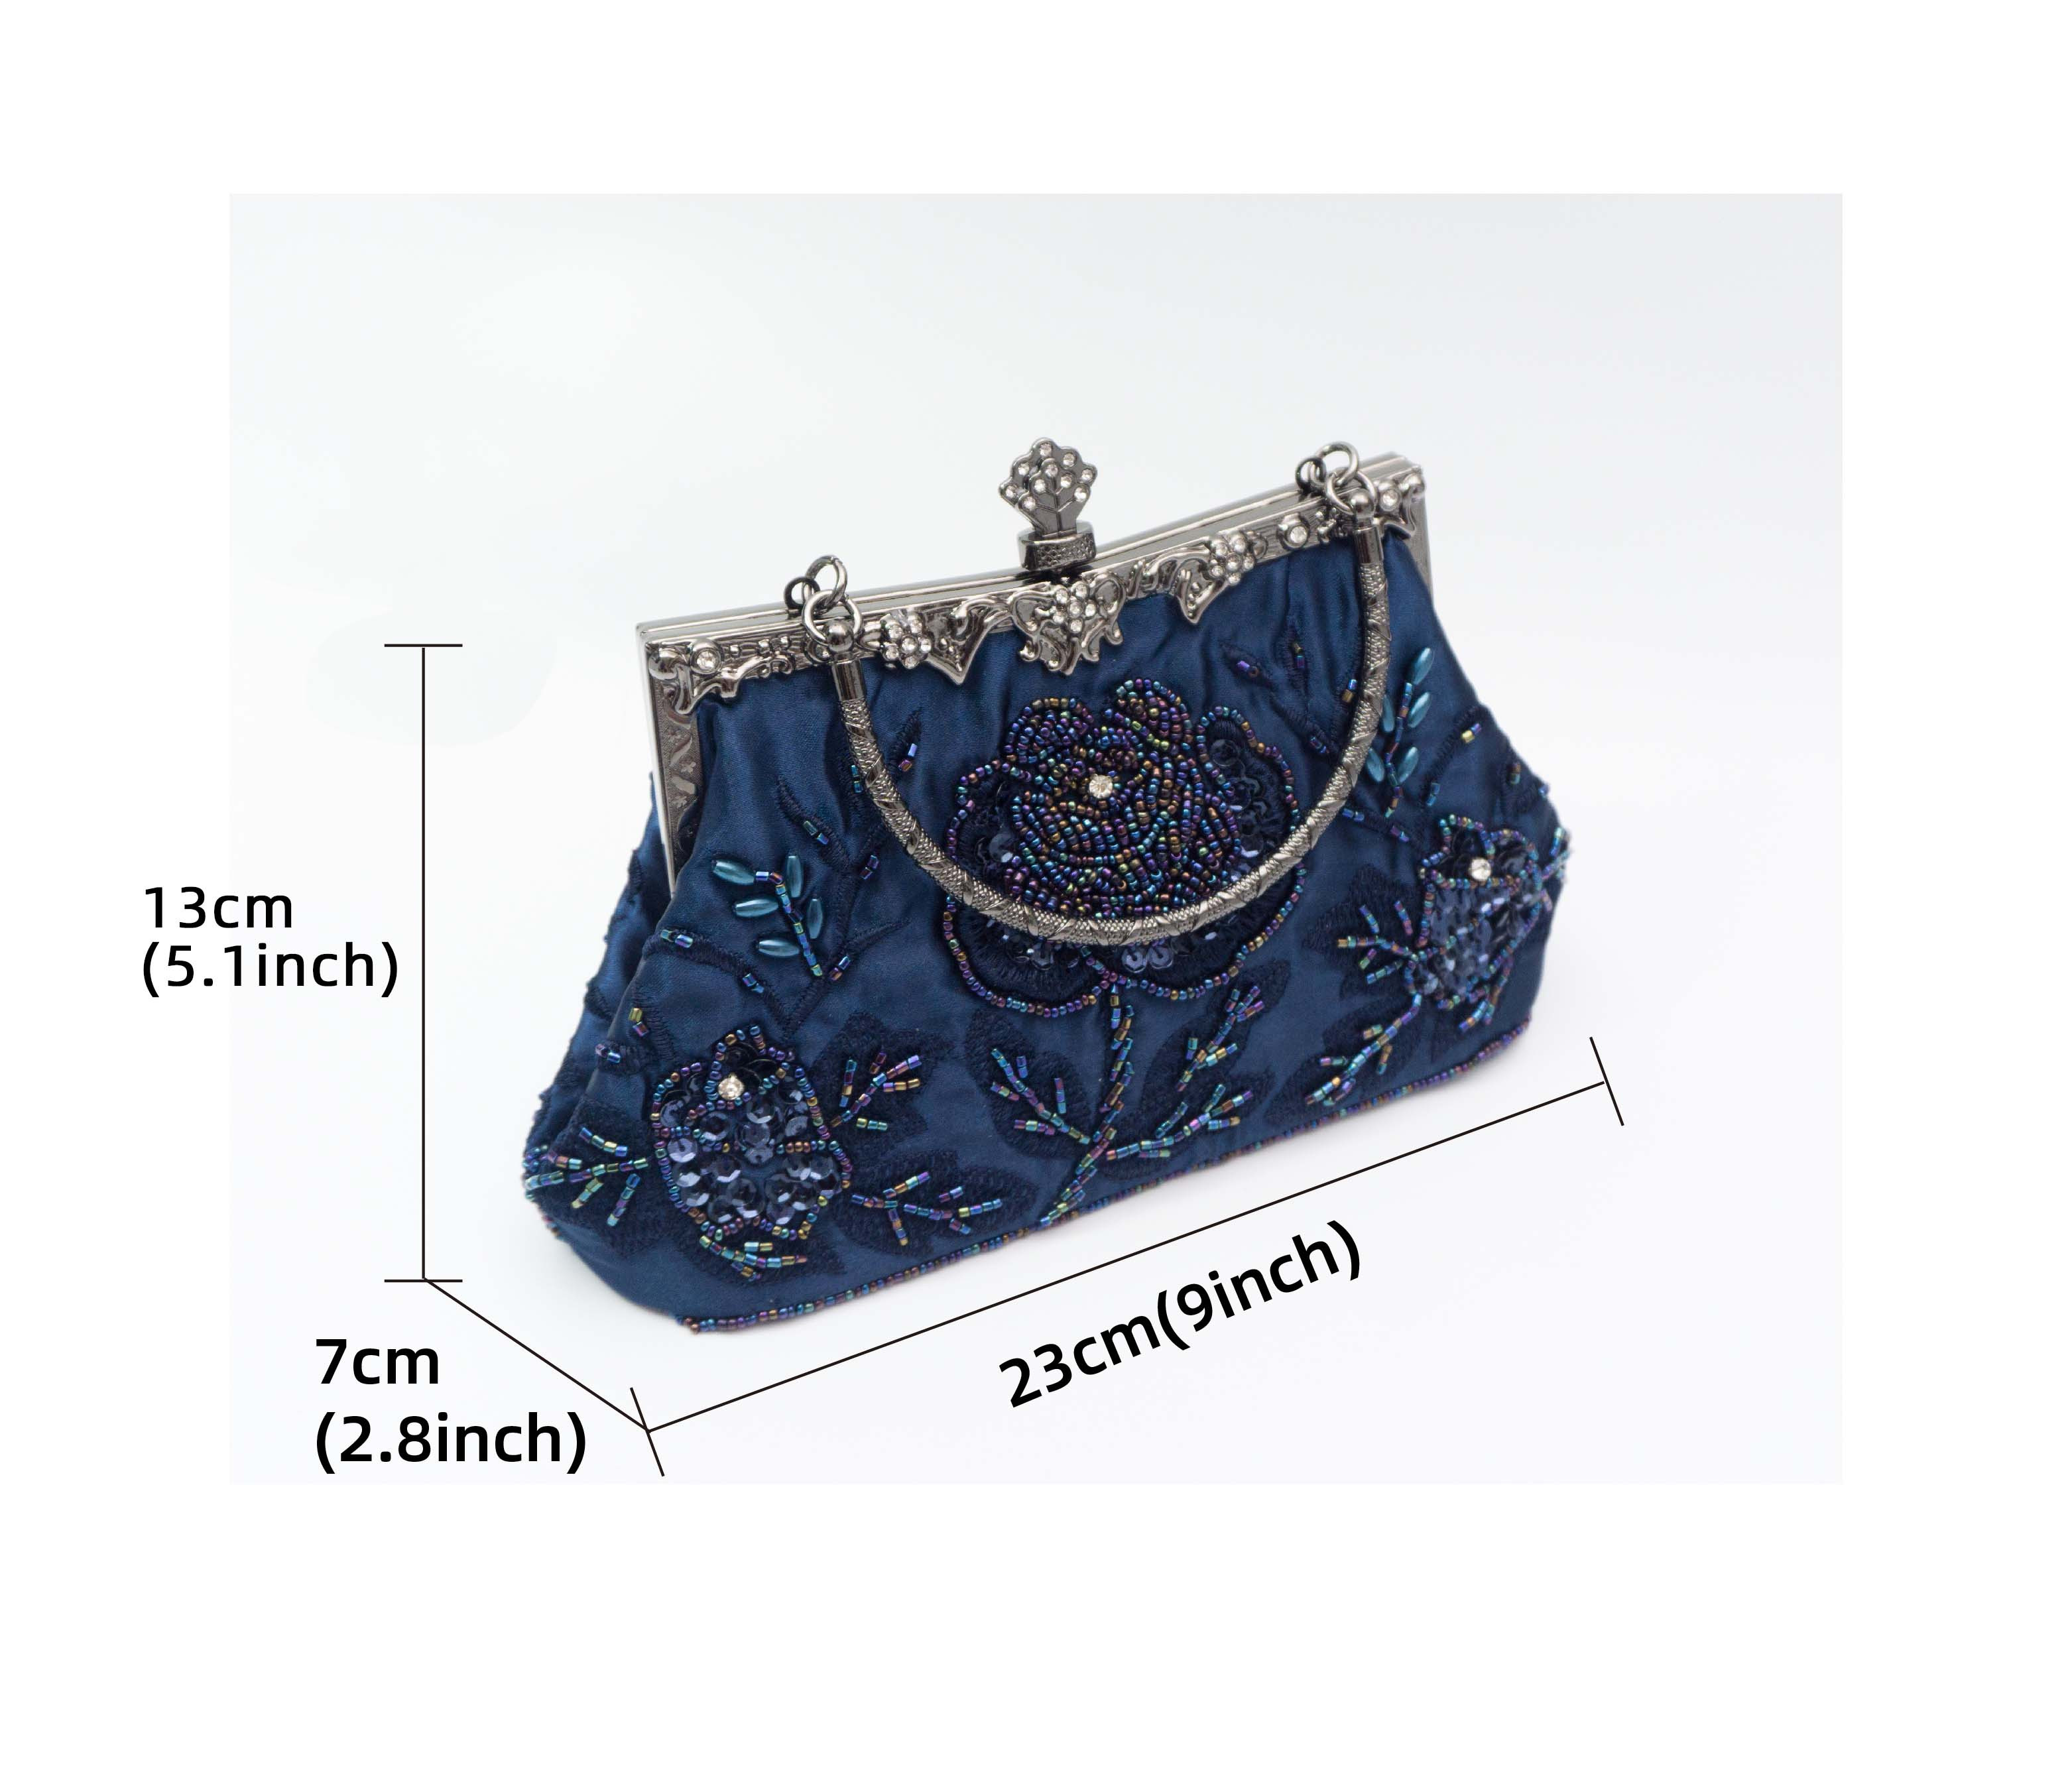 Selighting Colored Floral Clutches Evening Bags for Women Formal Bridal Wedding Clutch Purse Prom Cocktail Party Handbags (One Size Apricot), Womens